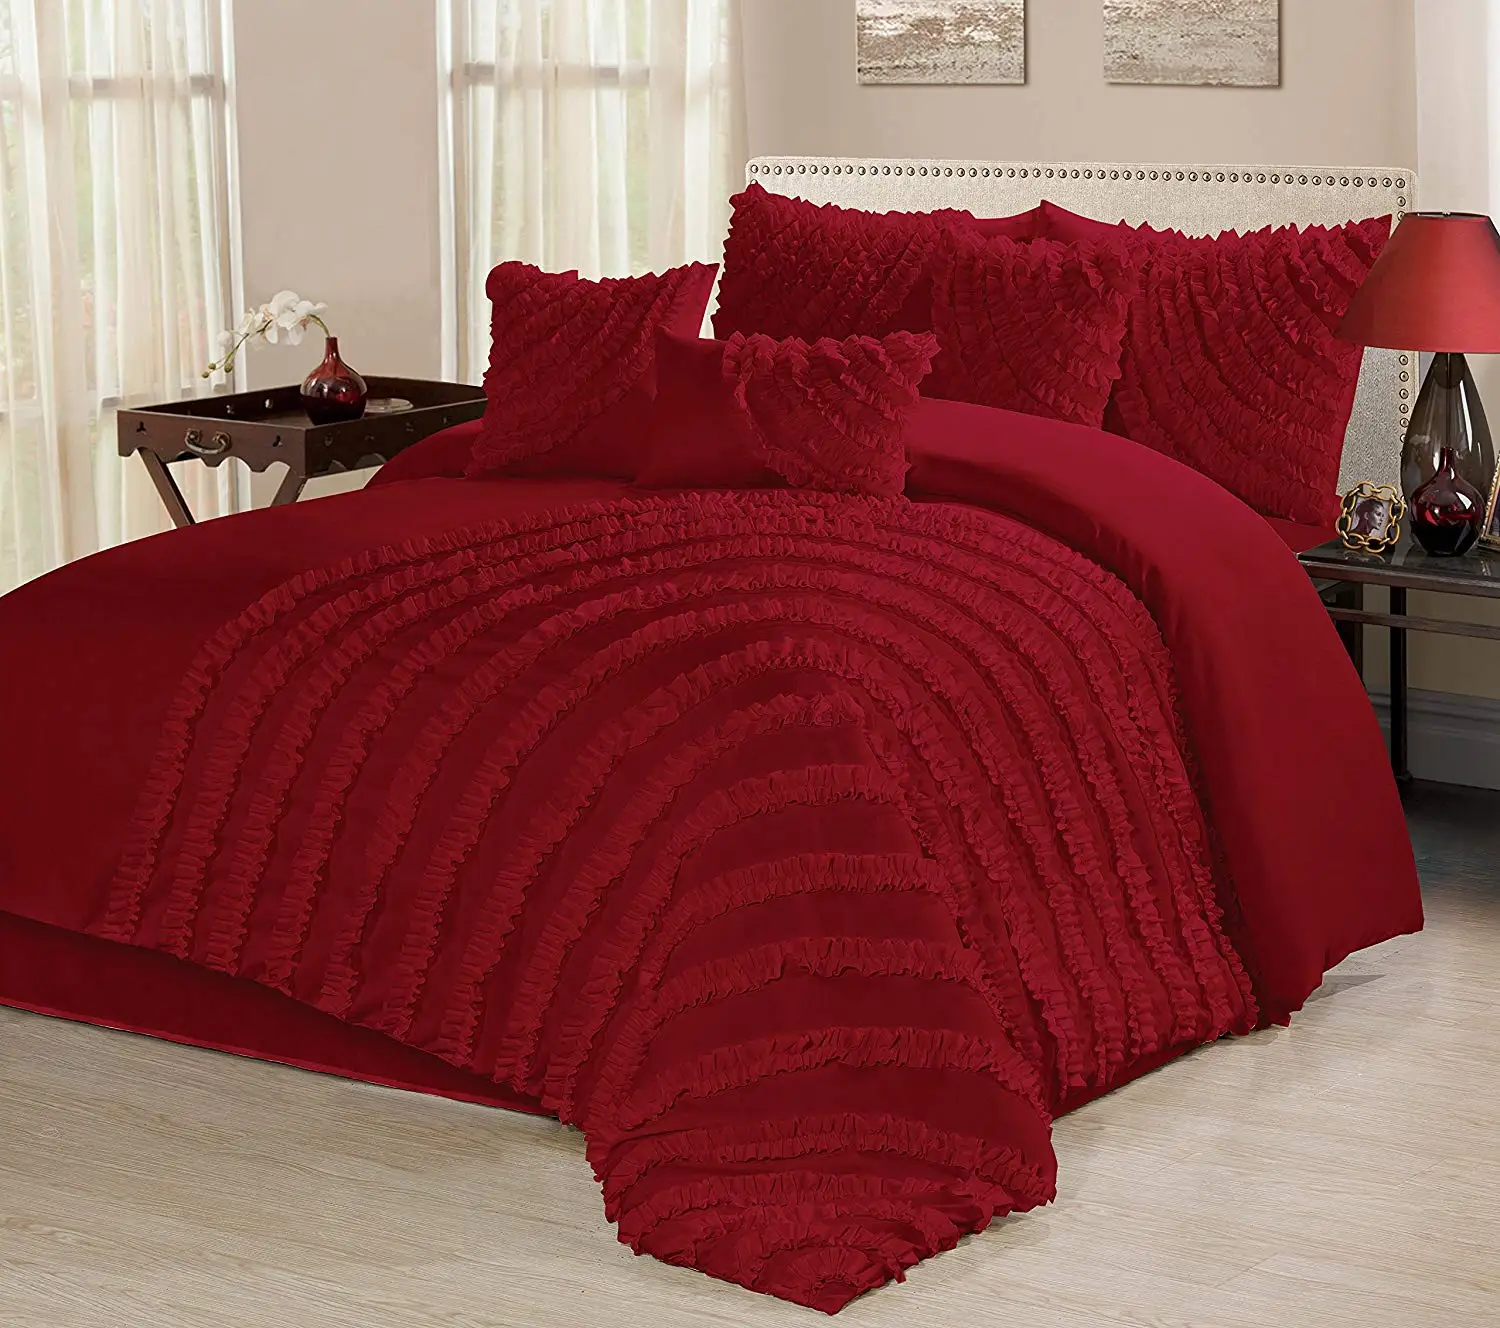 Cheap Red Cal King Comforter Sets, find Red Cal King Comforter Sets ...